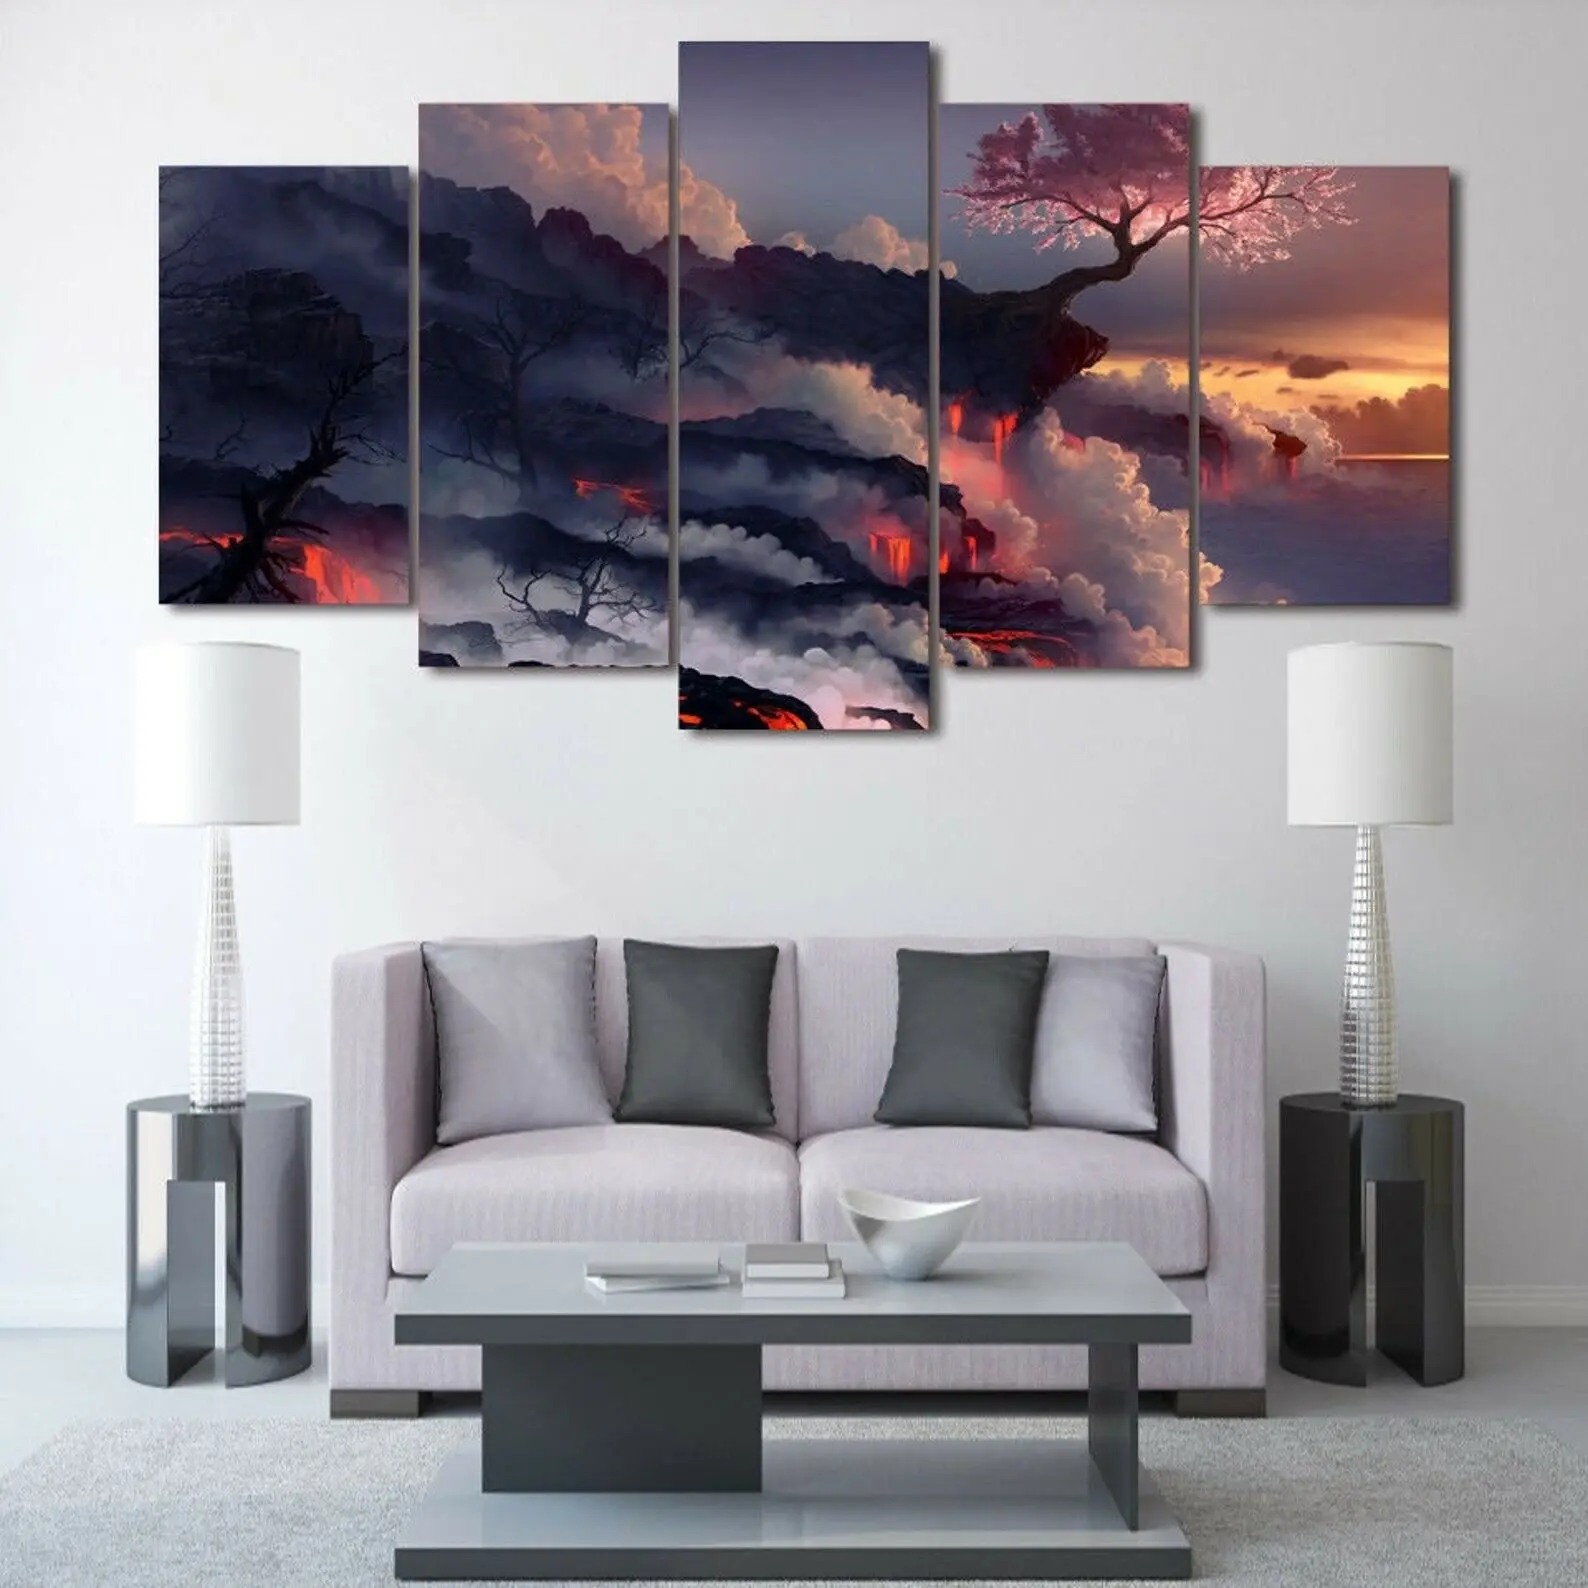 

No Framed 5 pieces Blossom Volcano Sunset Landscape Home Decor Modular Pictures Modern Canvas Paintings Printed Posters Wall Art